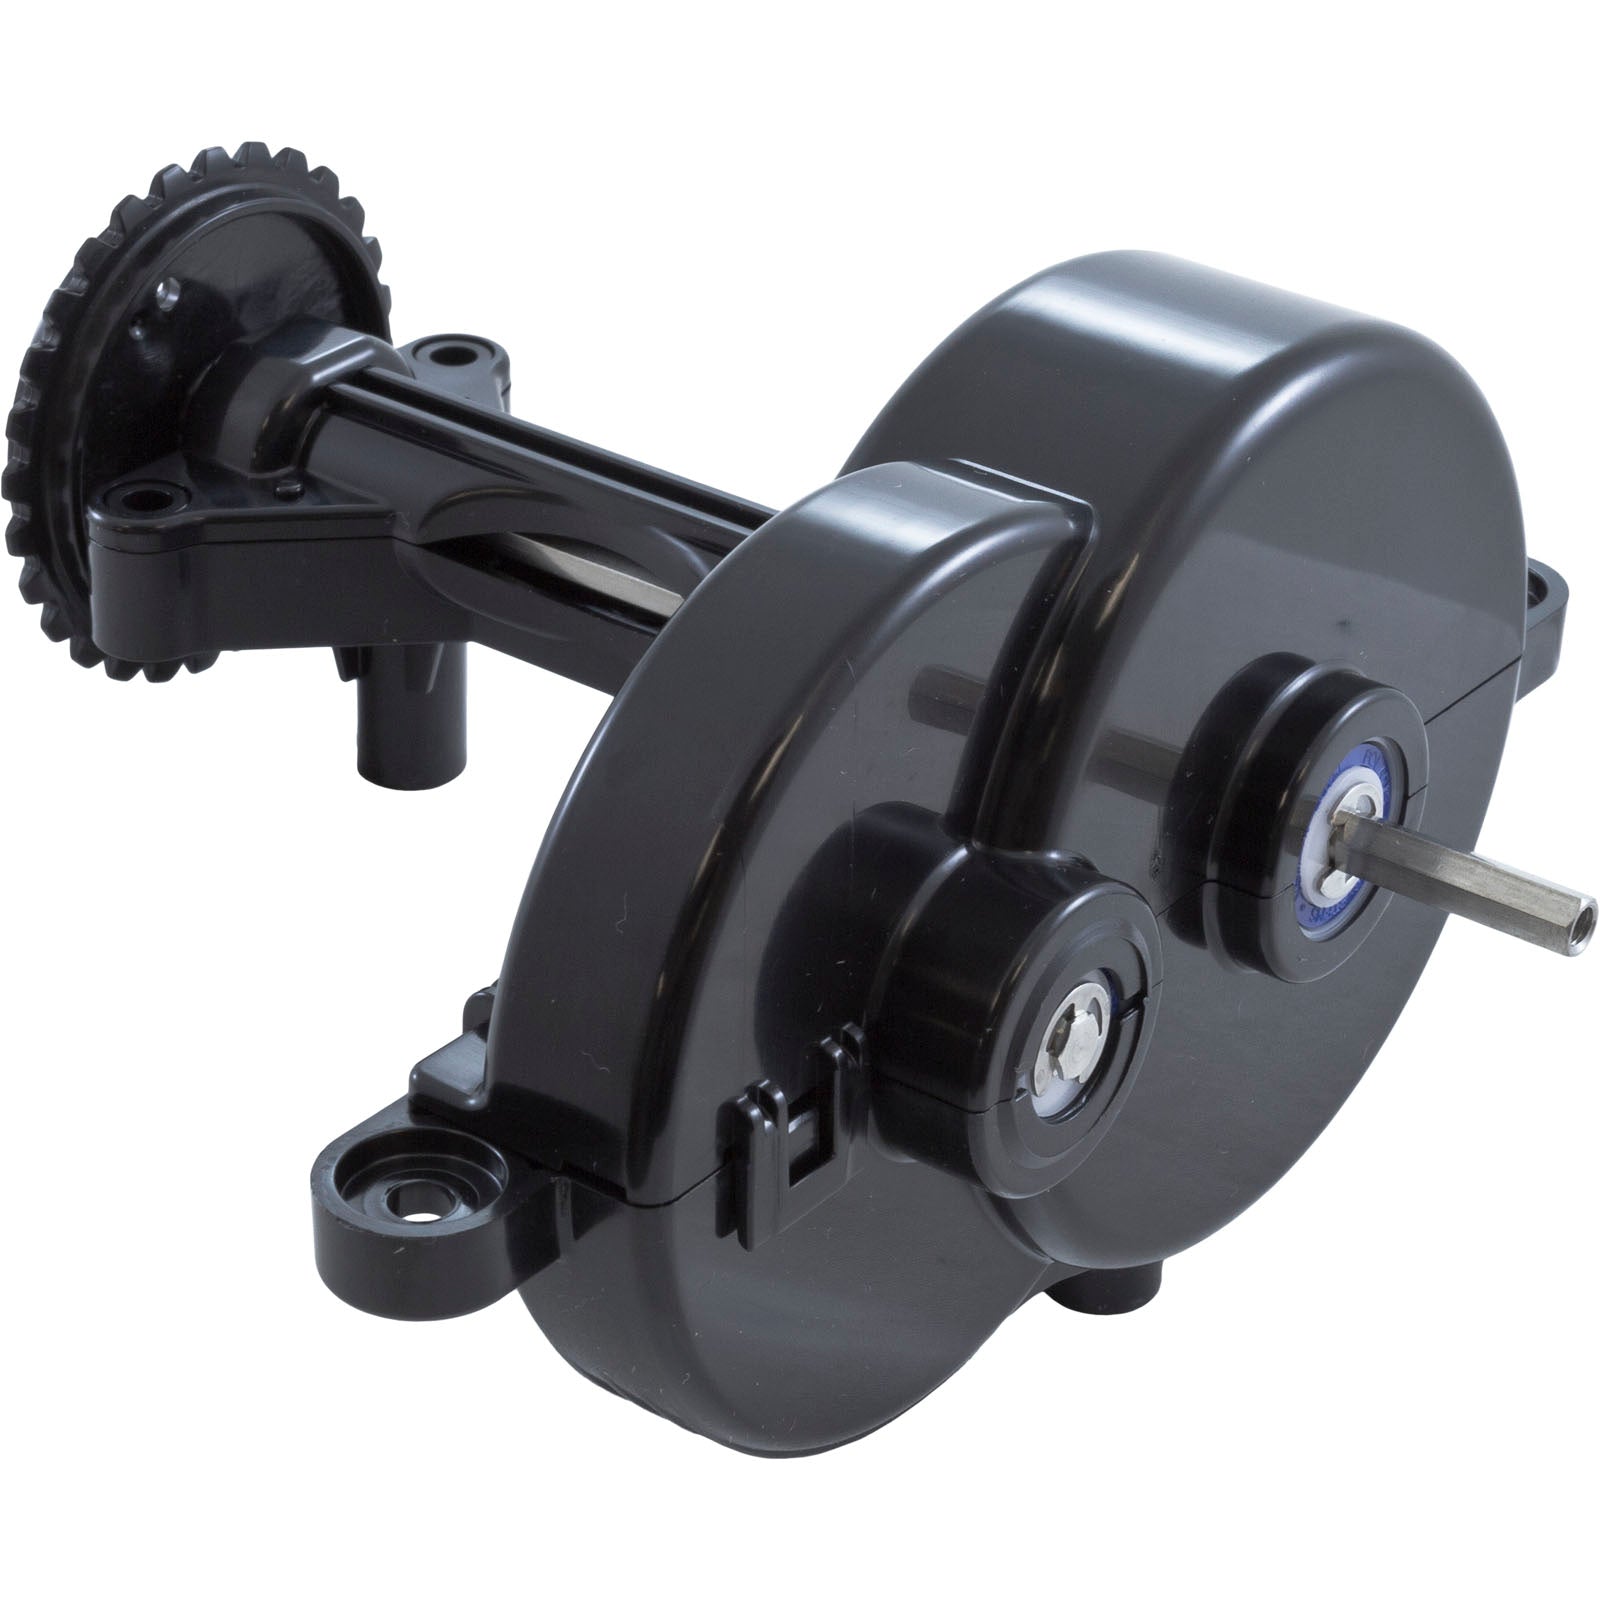 Zodiac/Polaris 39-200 Gearbox Assembly for 3900 Sport Pool Cleaner